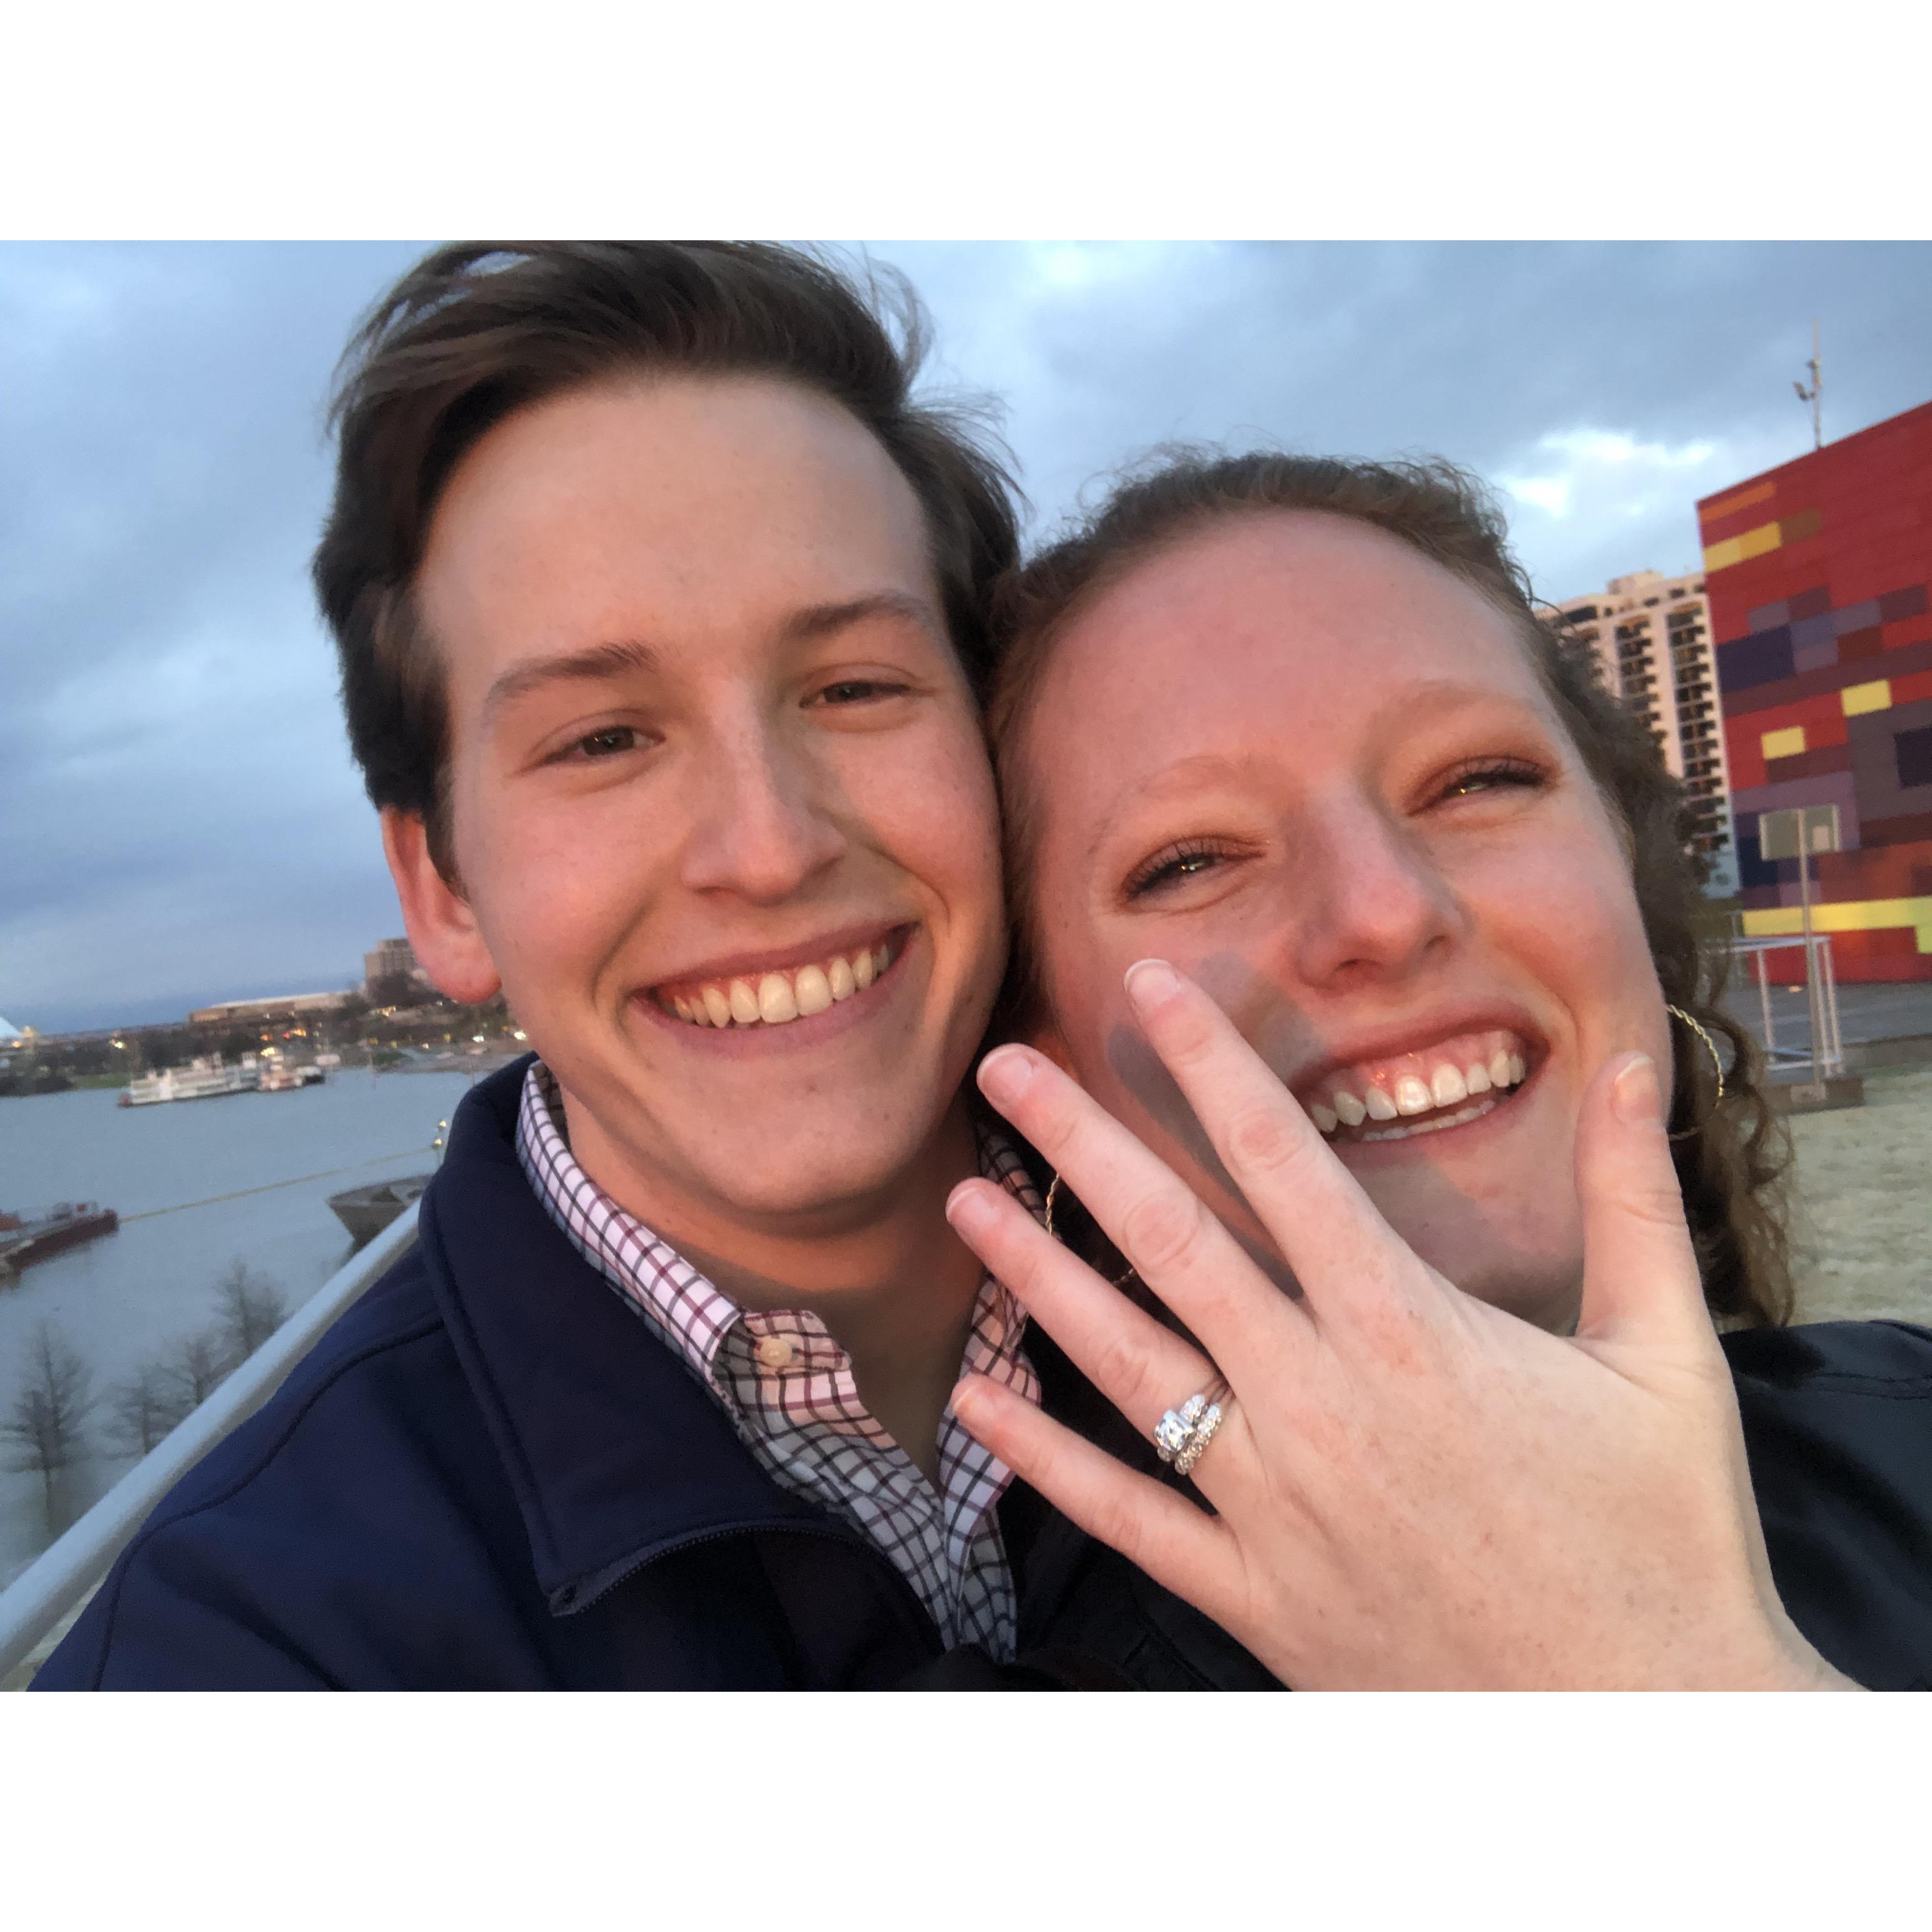 The day we got engaged!